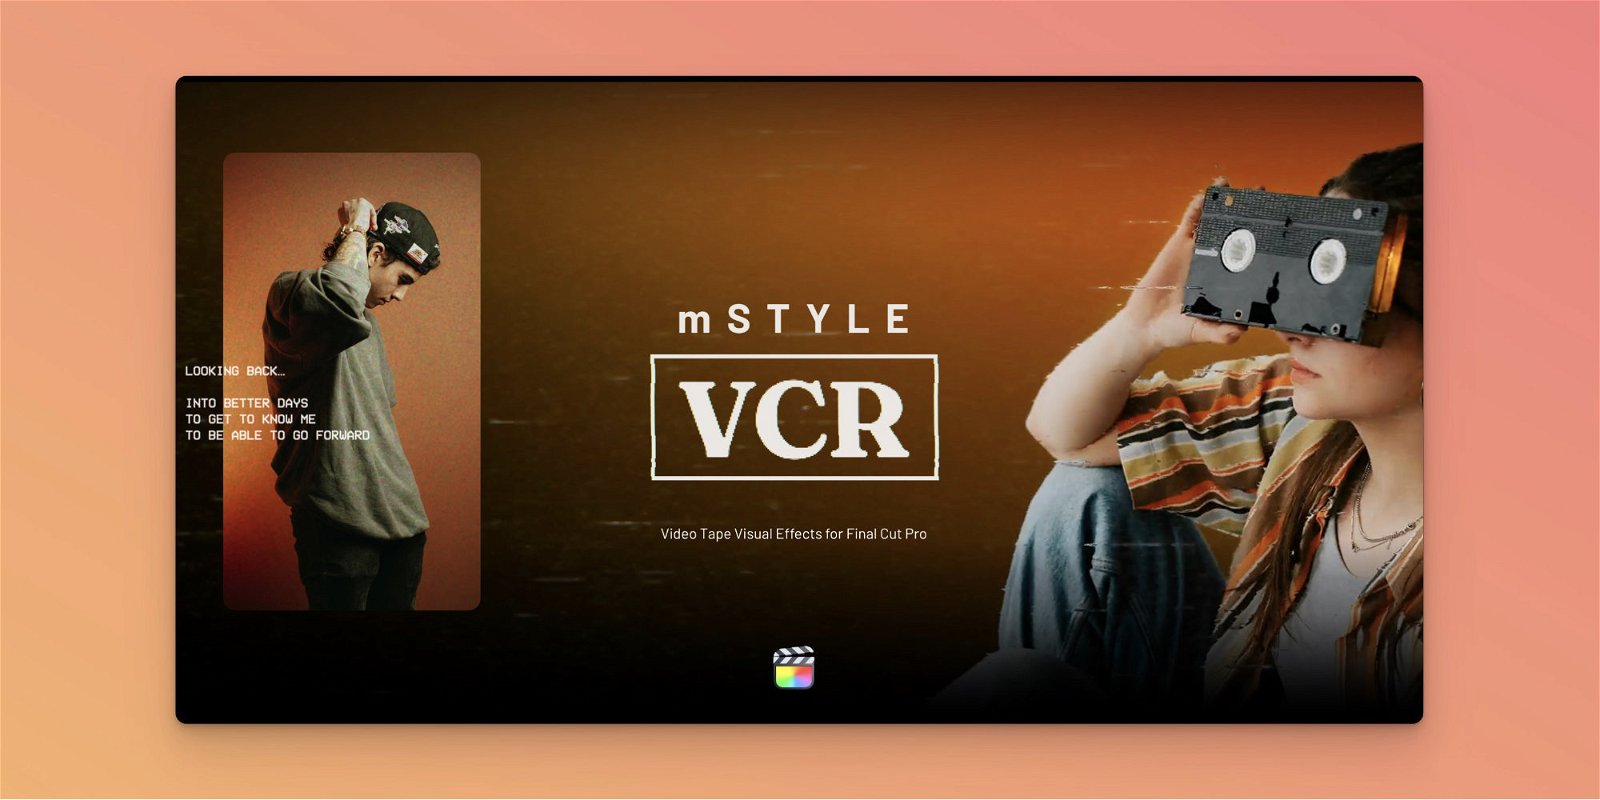 mStyle VCR